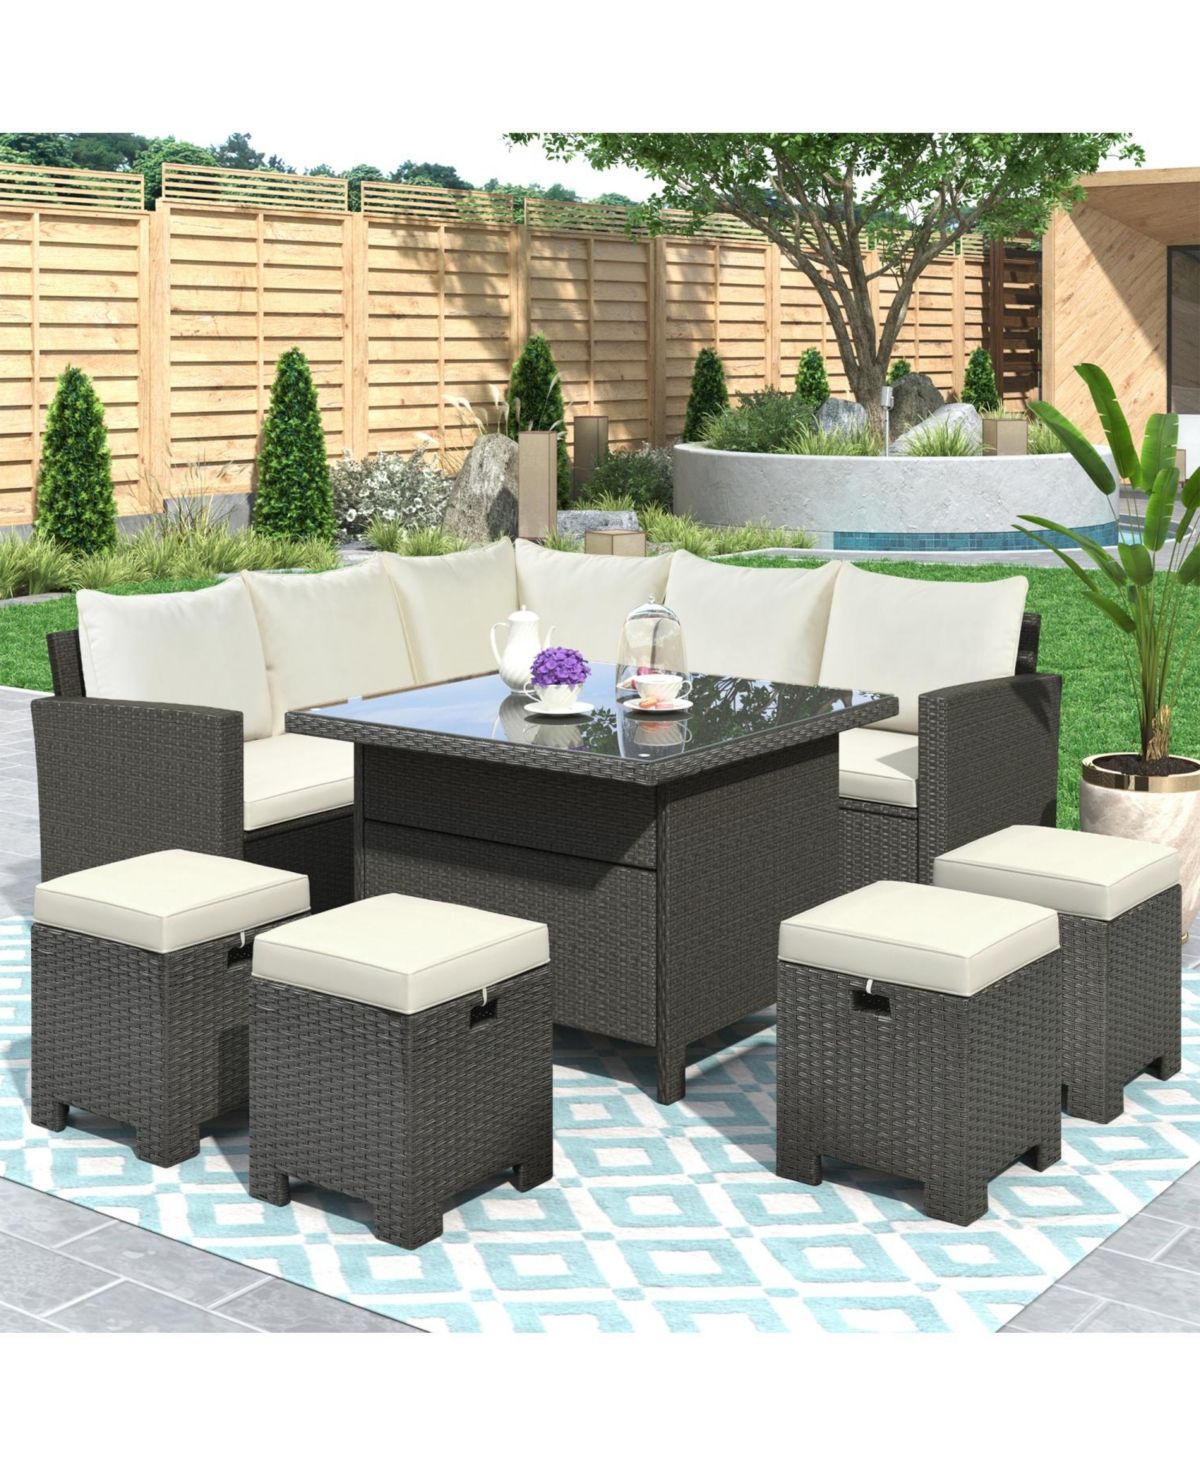 Ottomans Patio Furniture Set With Regard To Most Current Patio Furniture Set, 8 Piece Outdoor Conversation Set, Dining Table Chair  With Ottoman, Cushions (View 15 of 15)